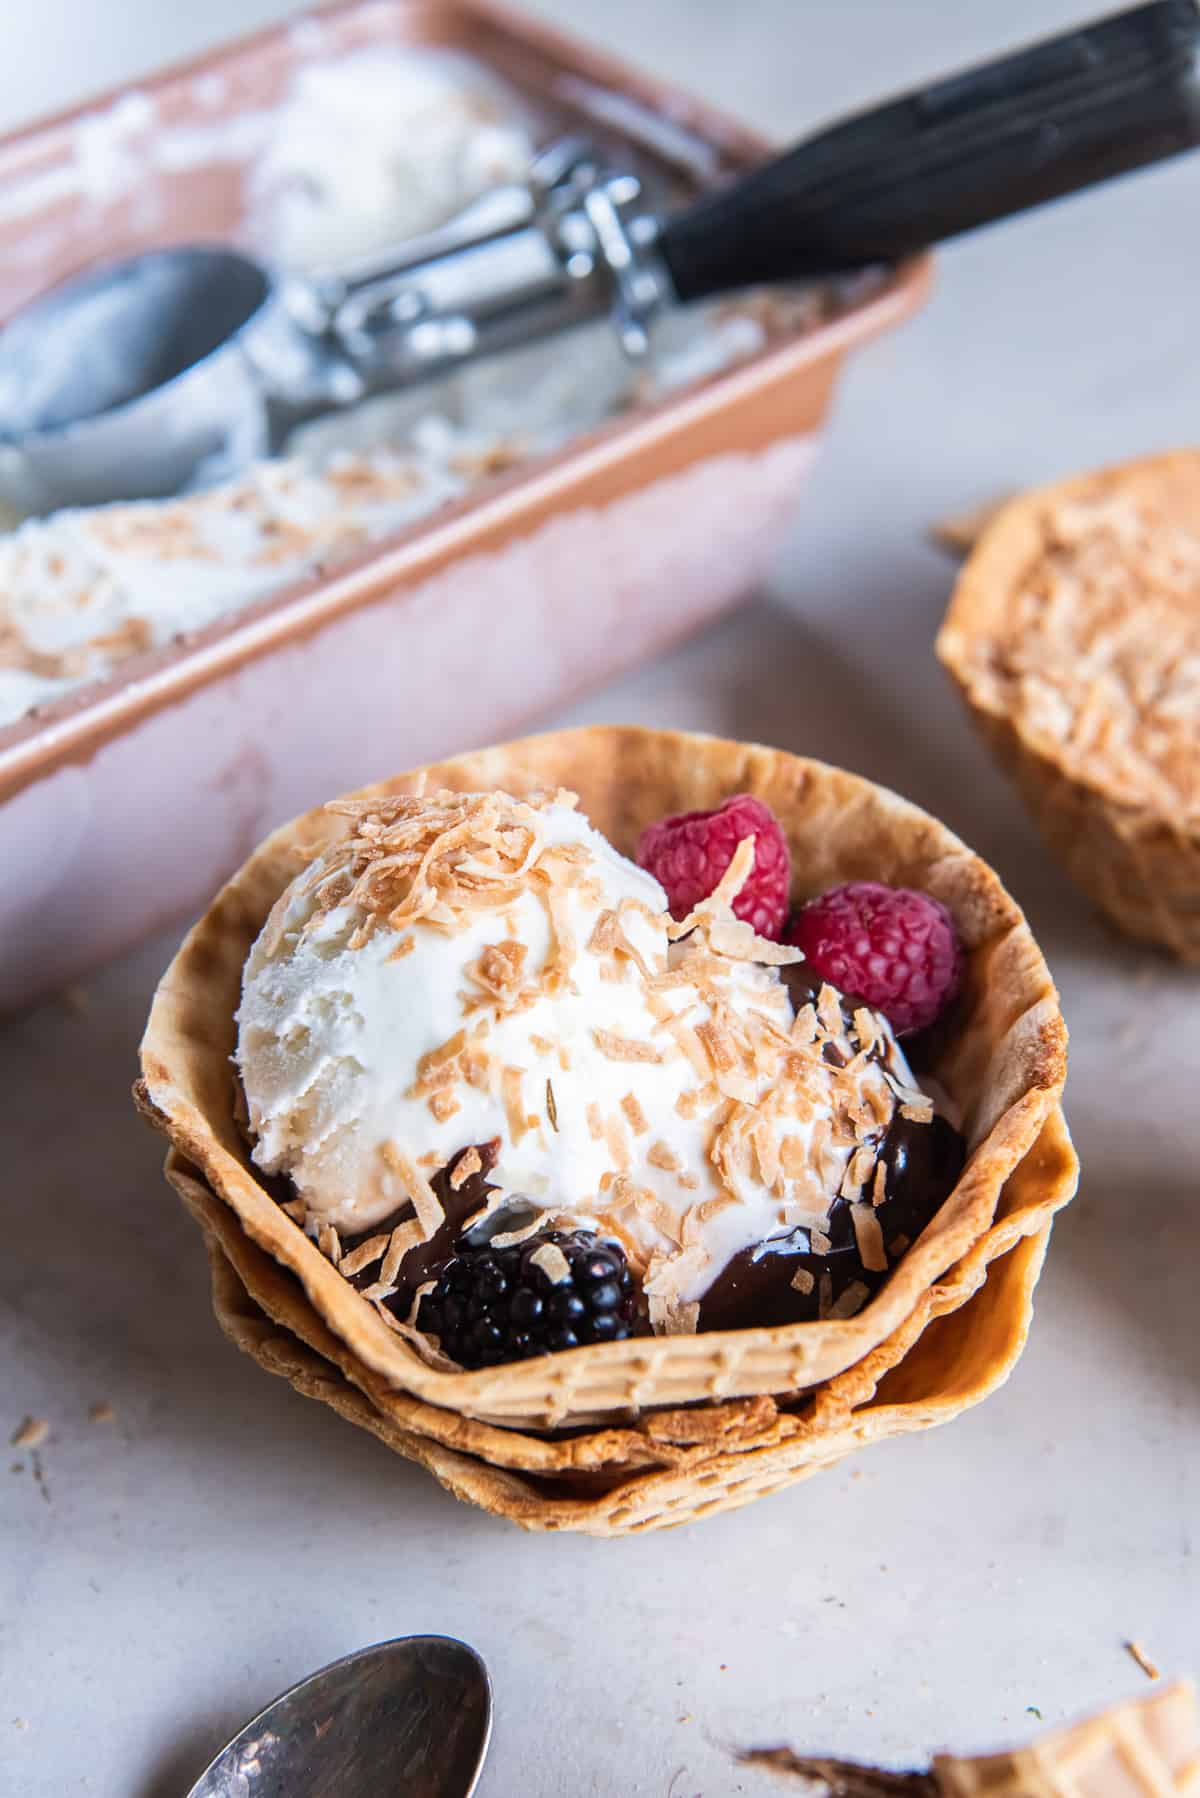 A stack of two waffle cone cups filled with coconut ice cream with toasted coconut and berries.